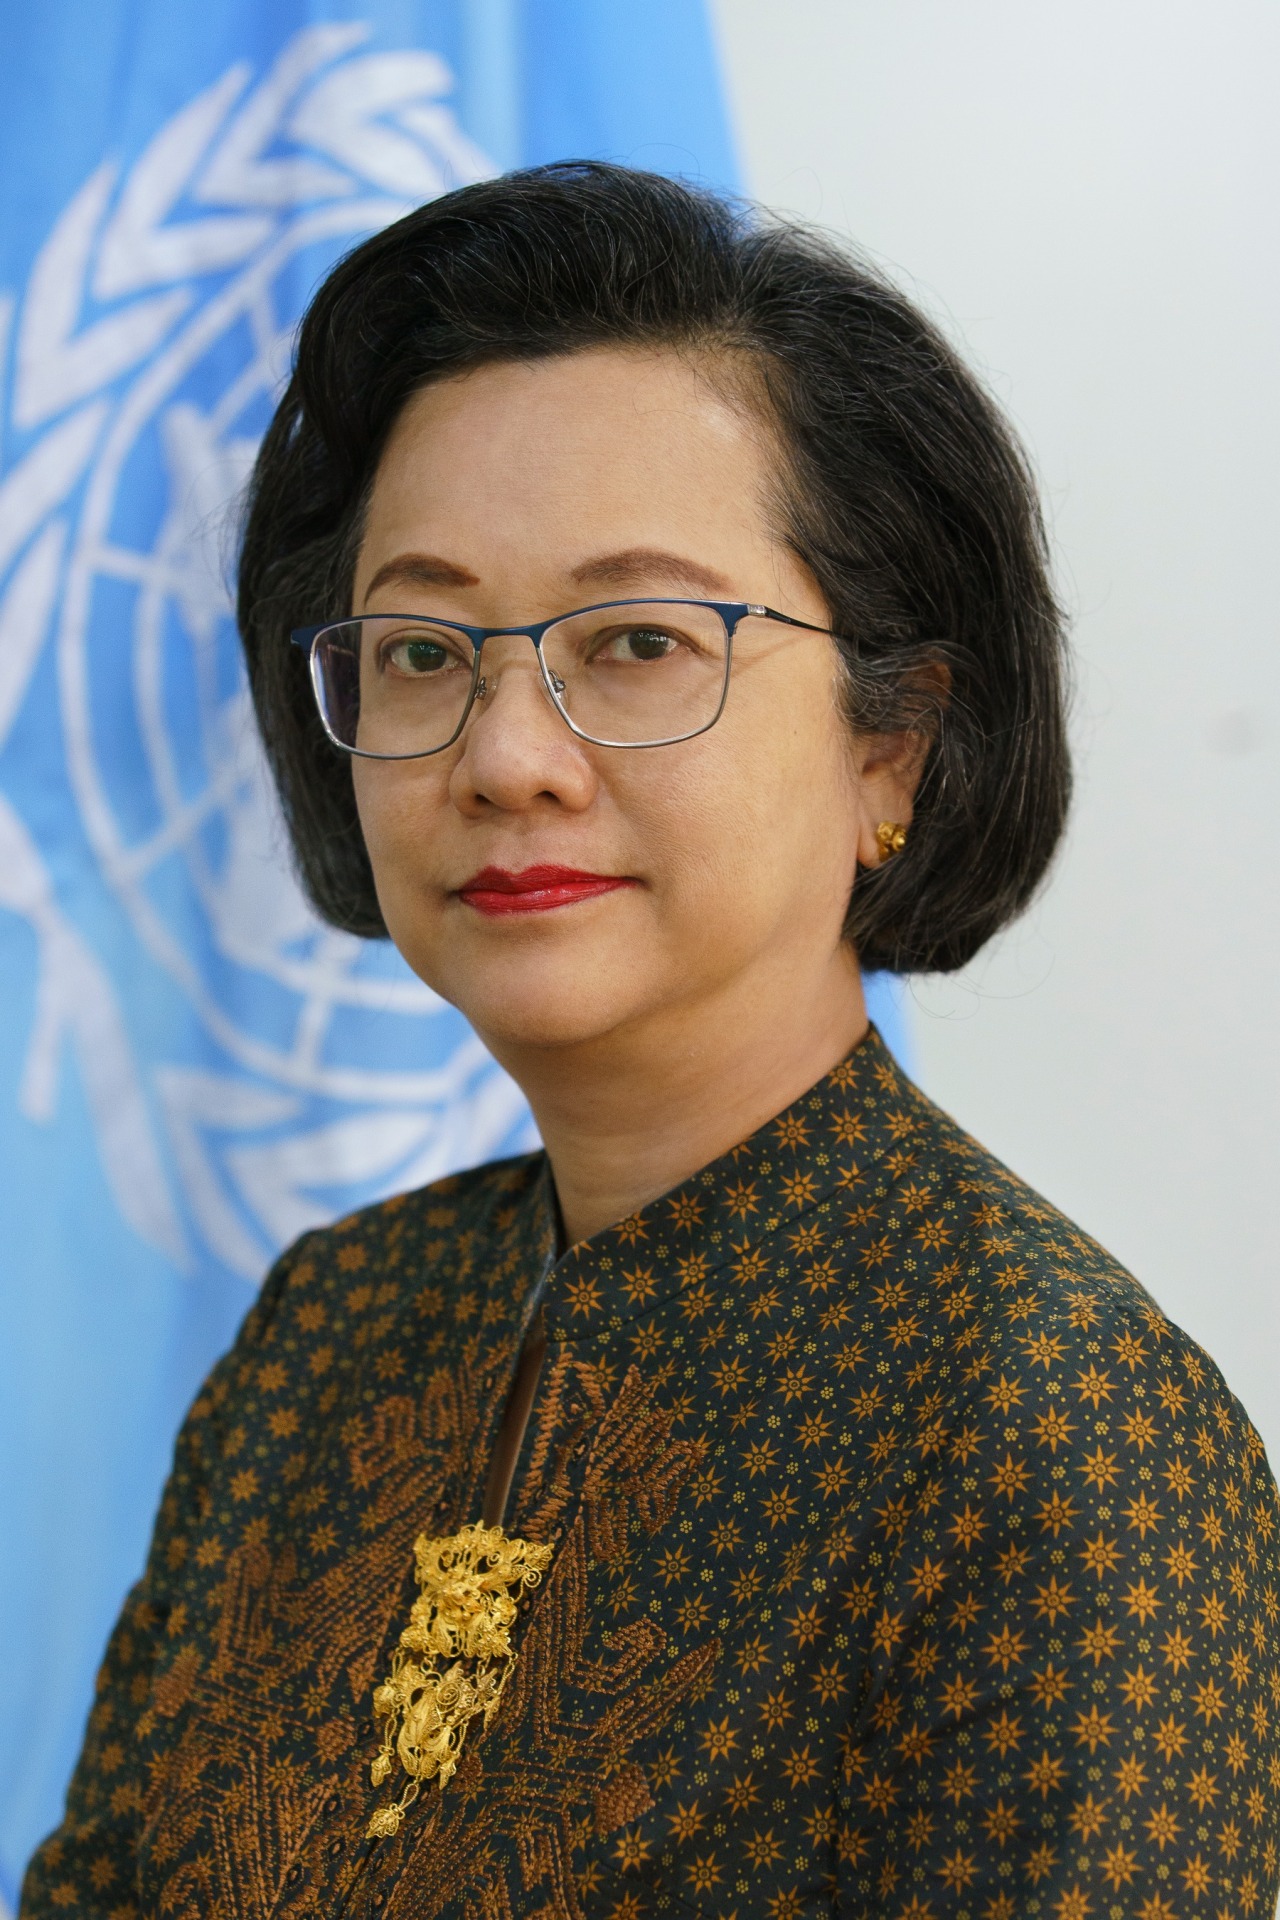 Armida Salsiah Alisjahbana, Under-Secretary-General of the United Nations and Executive Secretary of the Economic and Social Commission for Asia and the Pacific. (On the courtesy of KOICA)